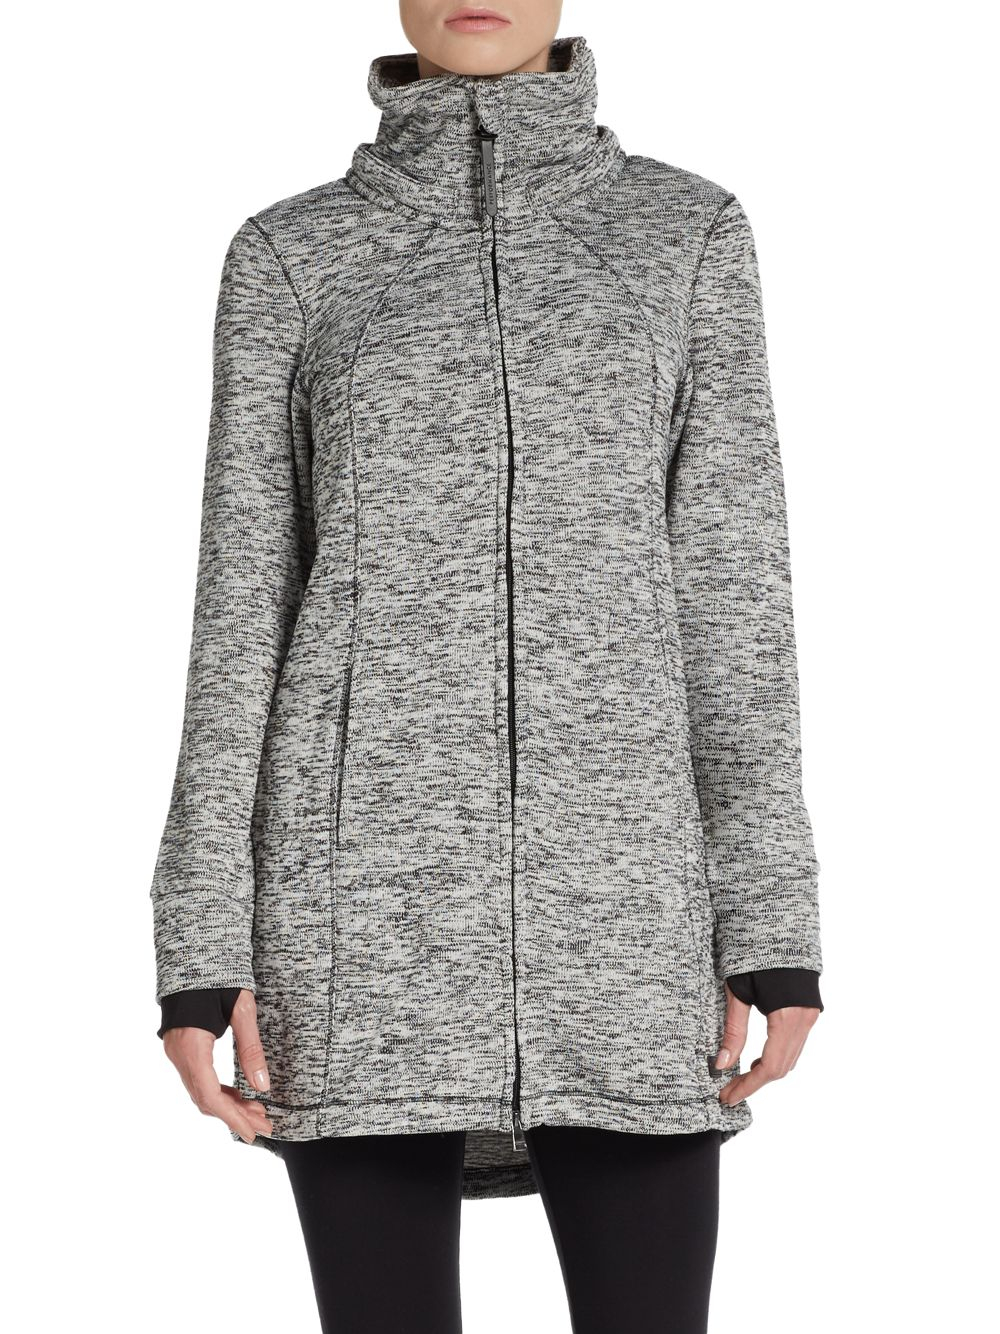 Calvin Klein Marled Hooded Performance Jacket in Gray | Lyst